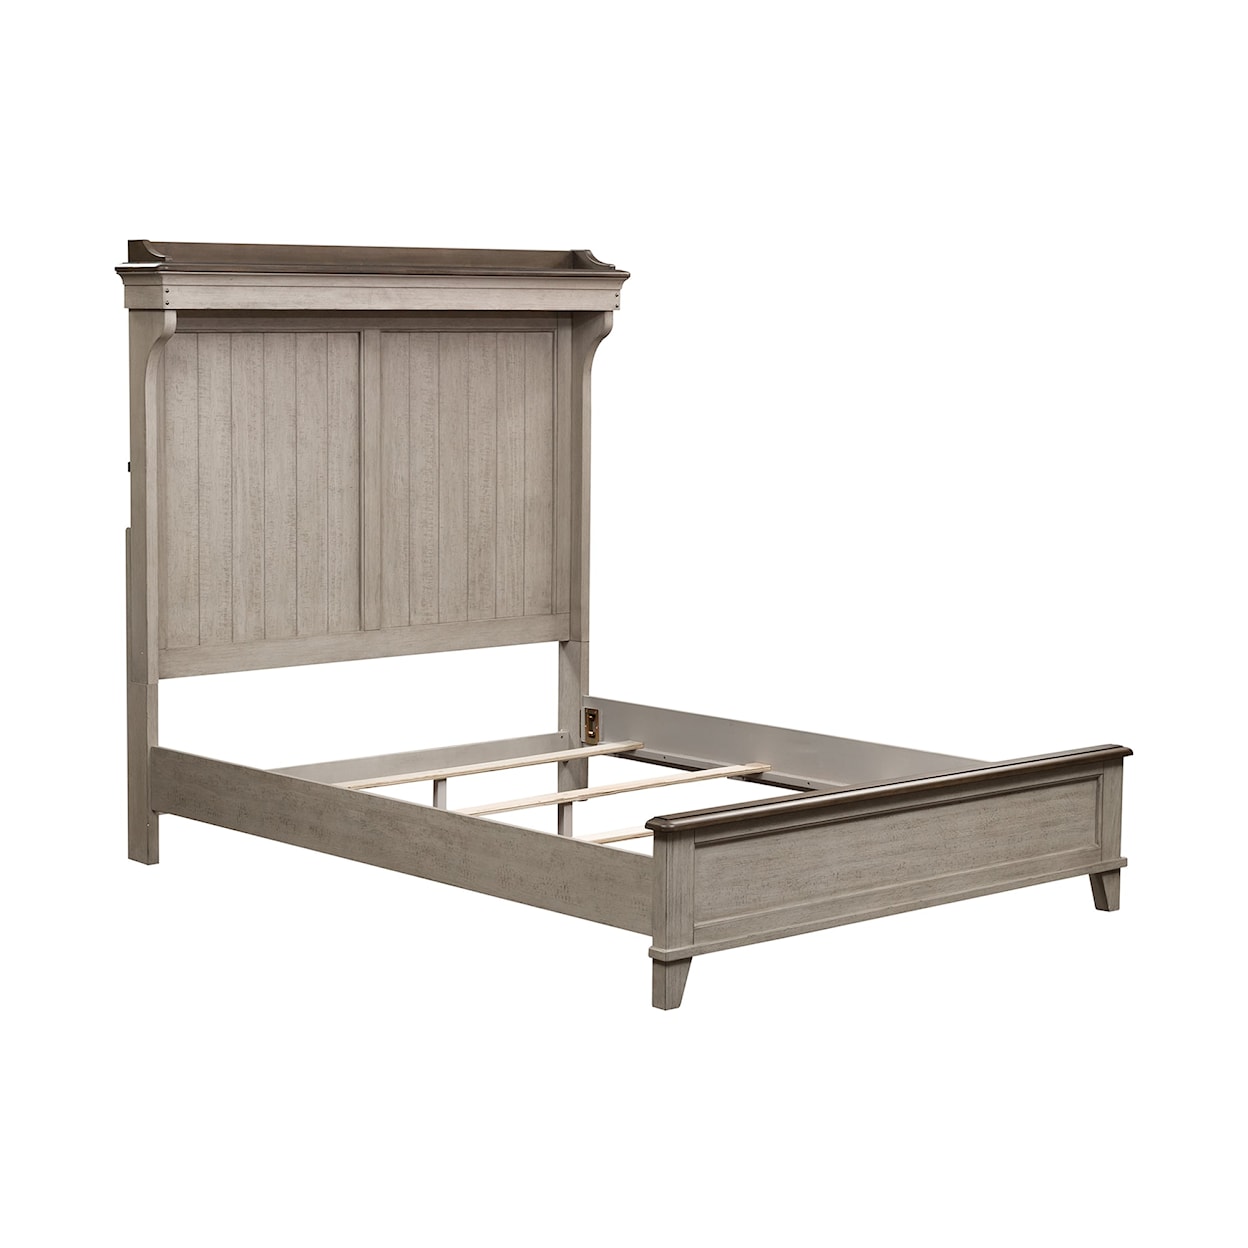 Libby Ivy Hollow Queen Mantle Bed